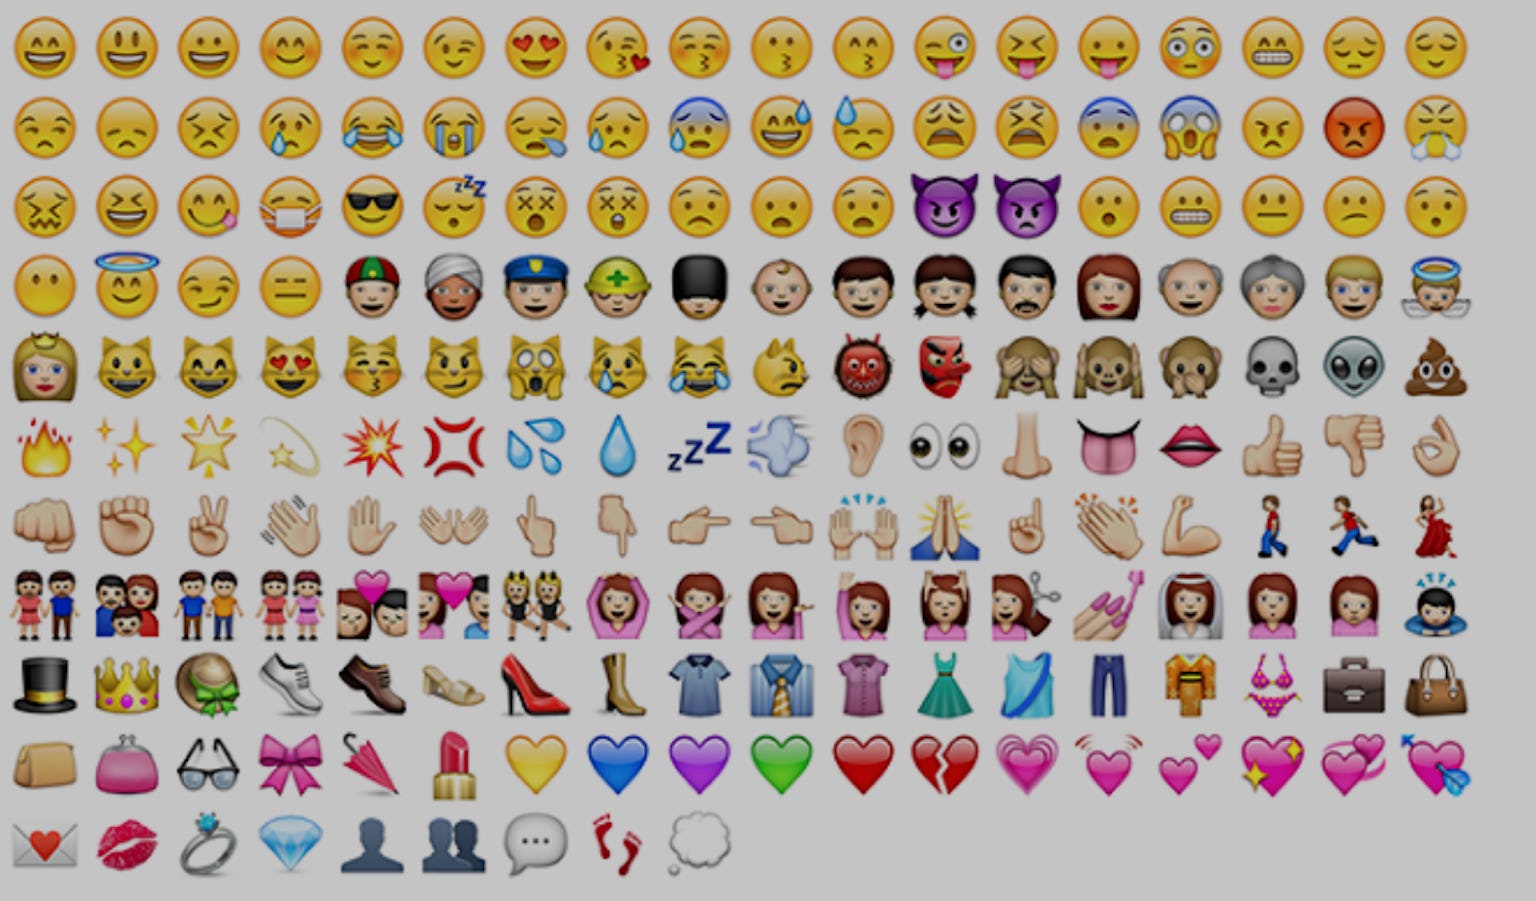 Corporations Are Making a Killing Off of Millennial Emoji Users